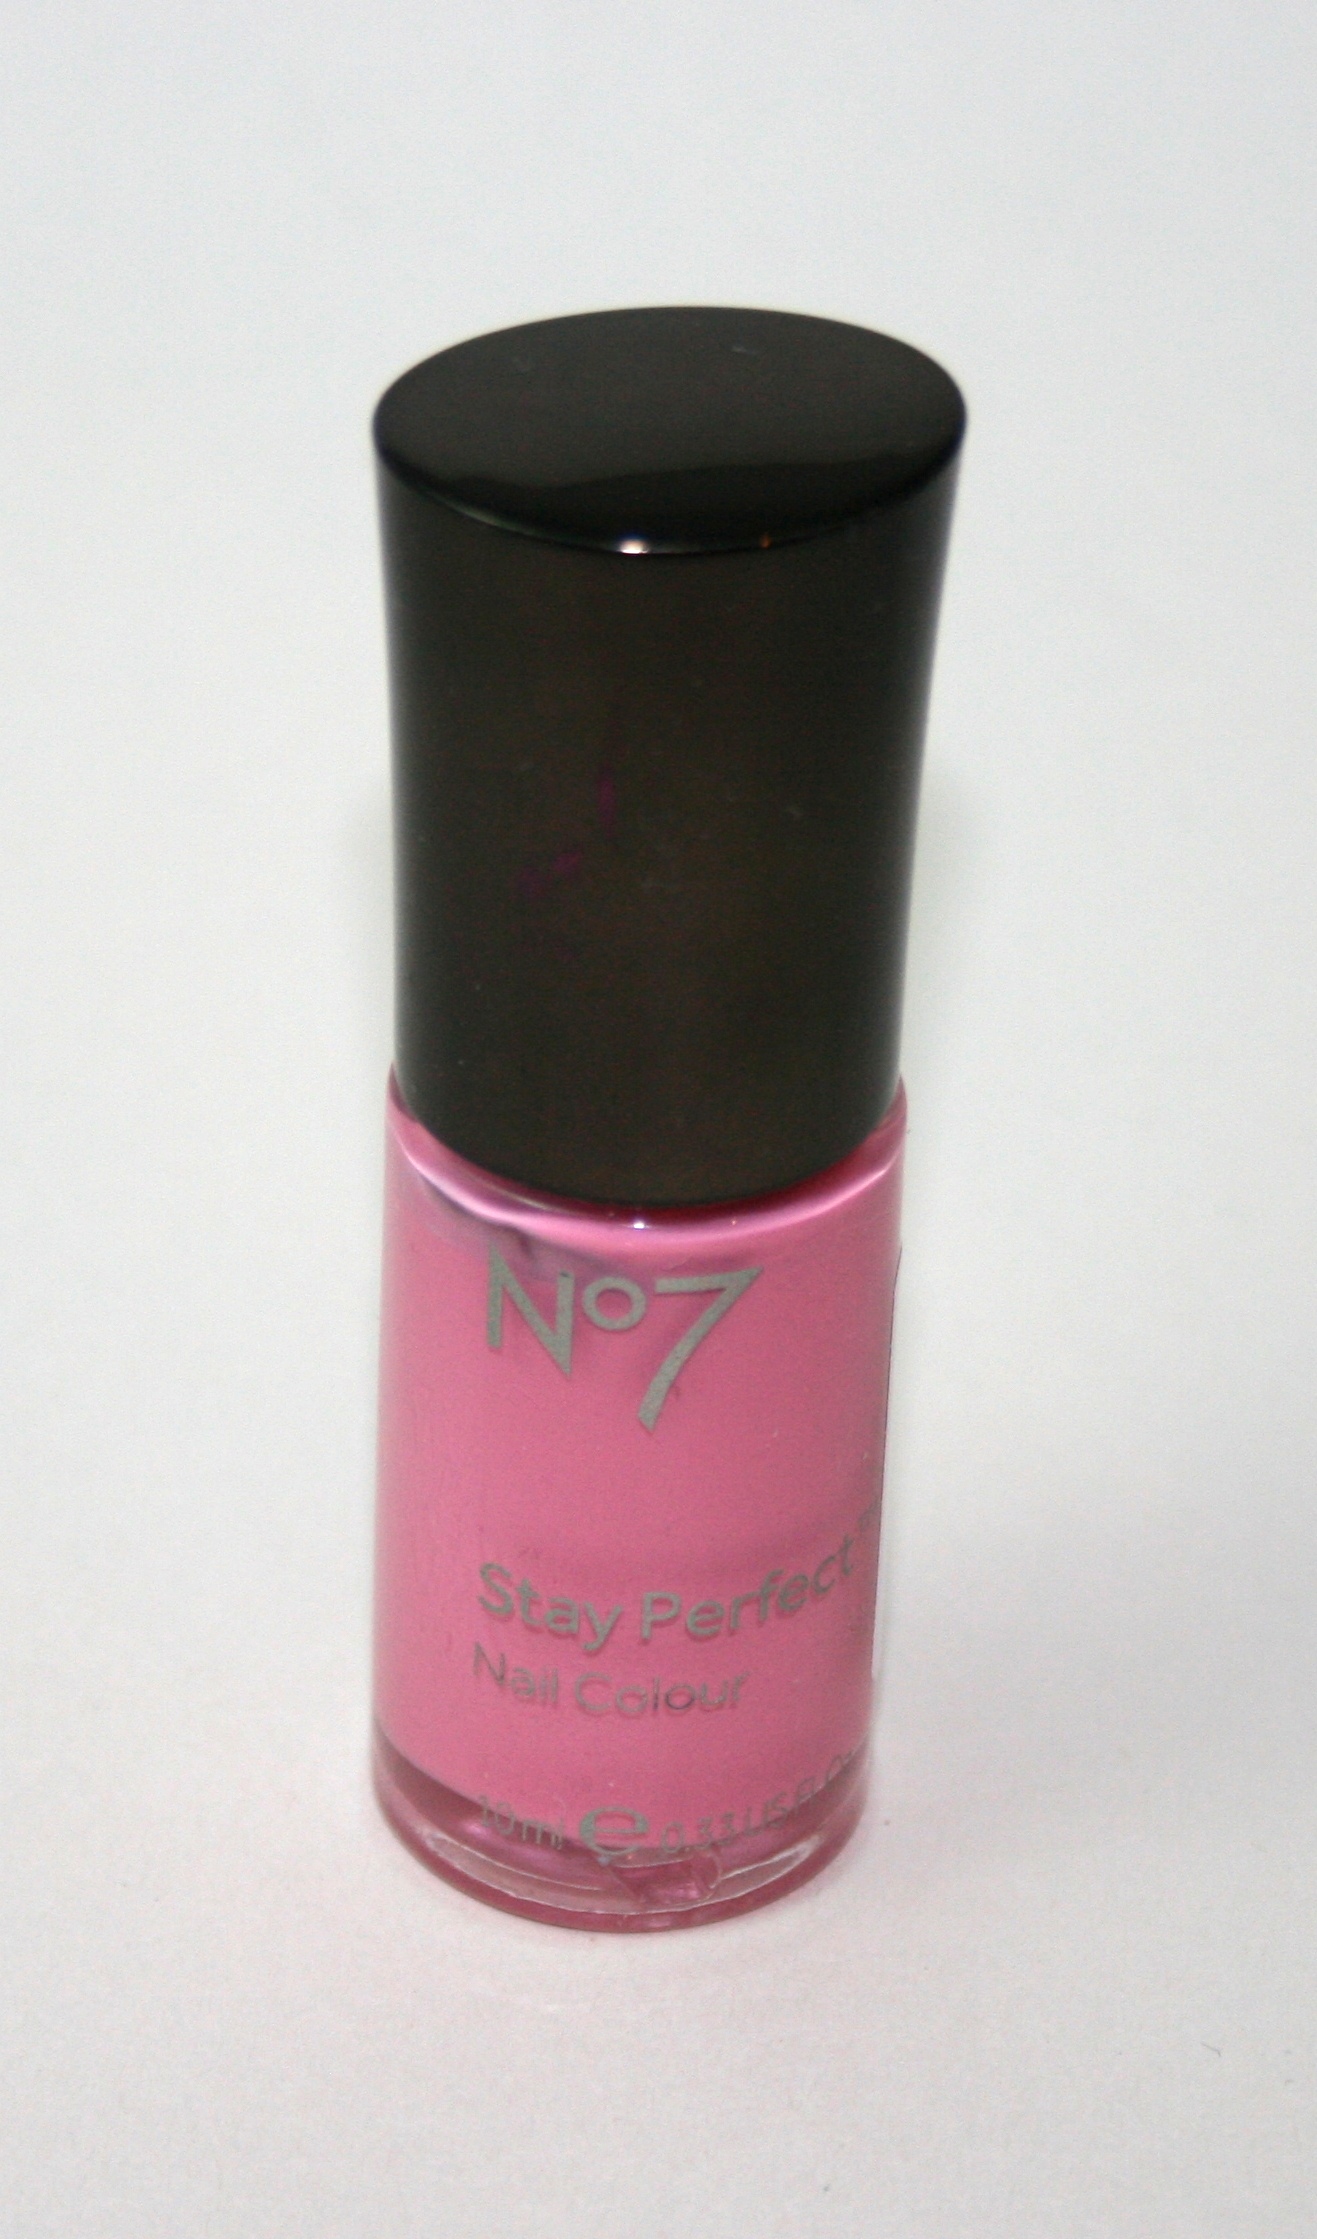 NOTD: Boots No7 Pink Blossom - Beauty Geek